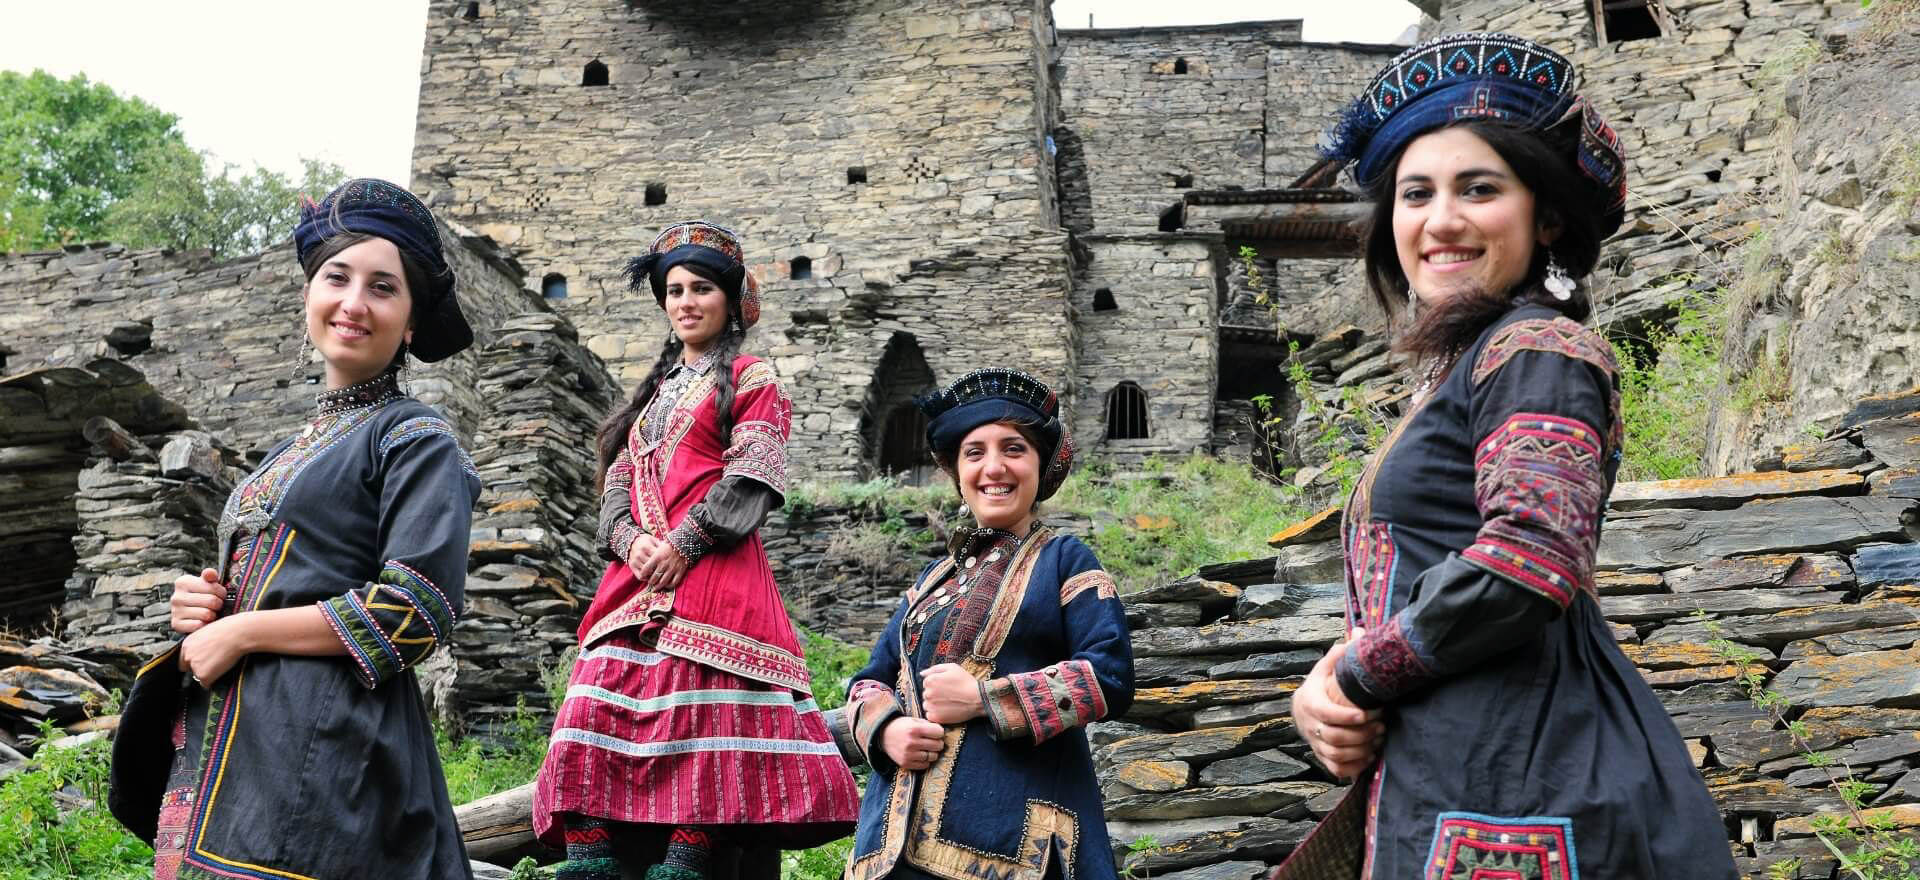 Women in traditional dress in Svaneti region - Georgia tours and holidays